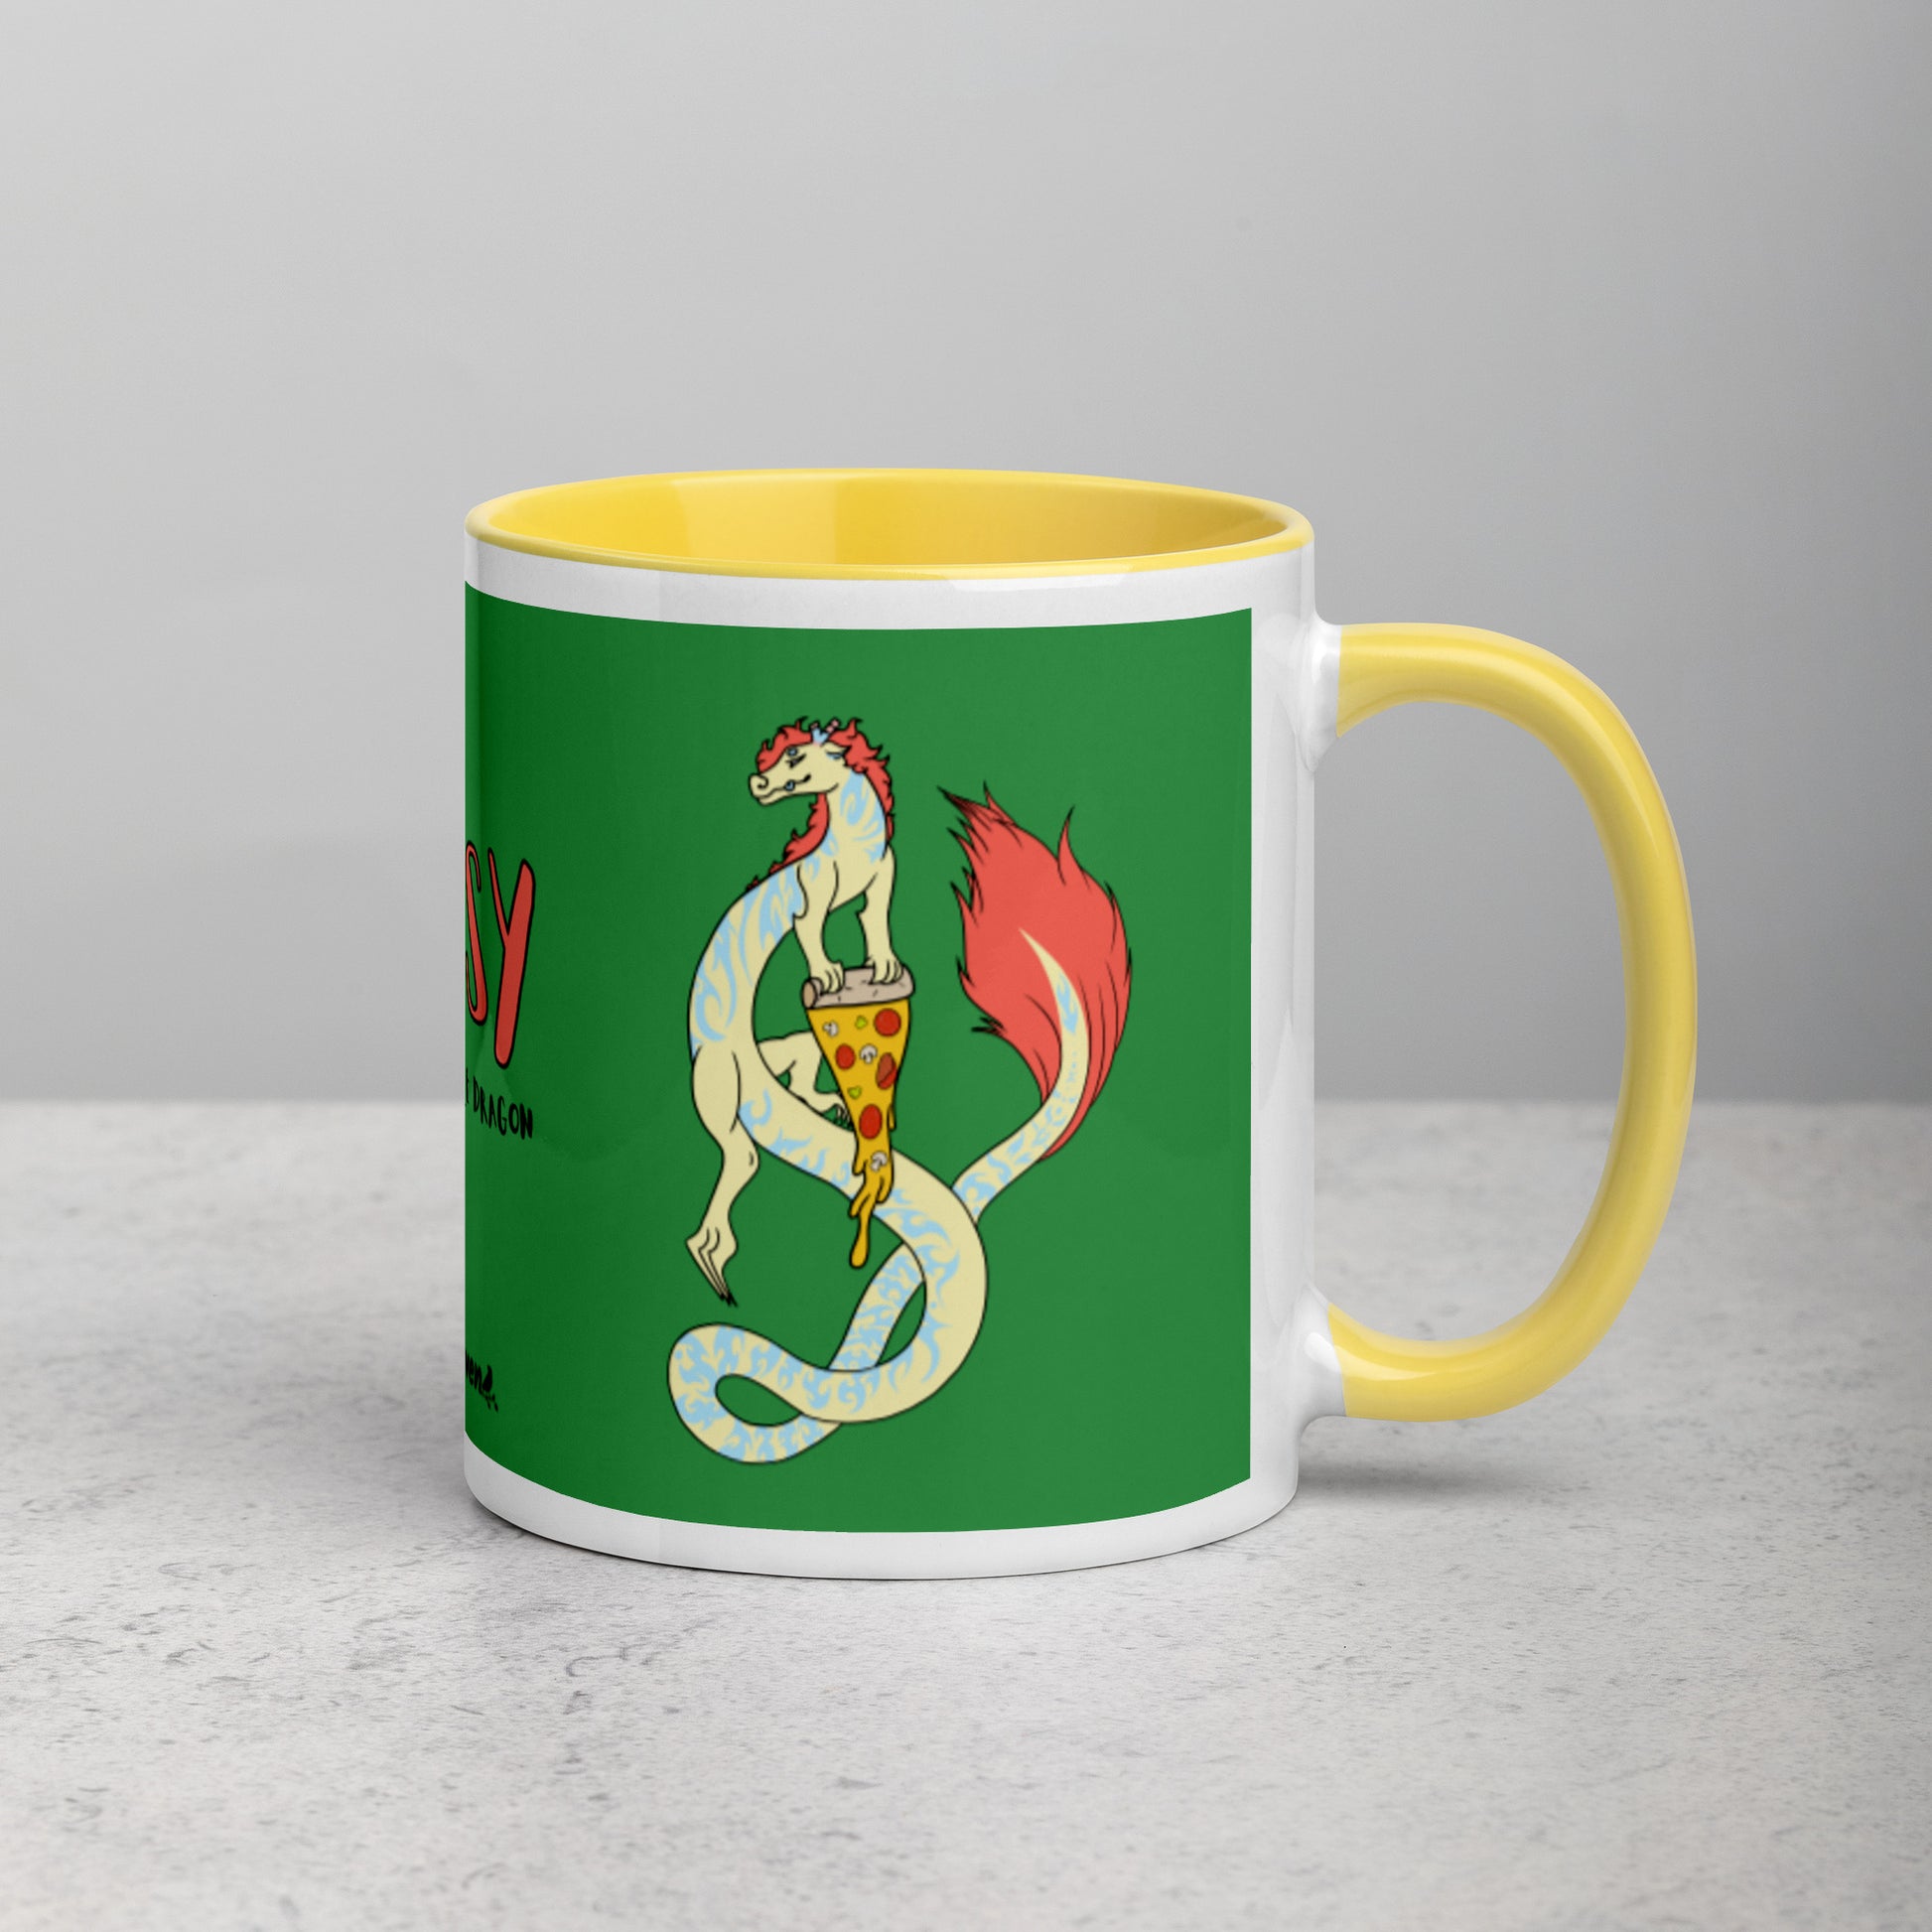 11 ounce white ceramic mug. Yellow inside and handle. Features double-sided image of Maisy the Fuzzy Noodle Dragon with a slice of pizza. Shown on tabletop.